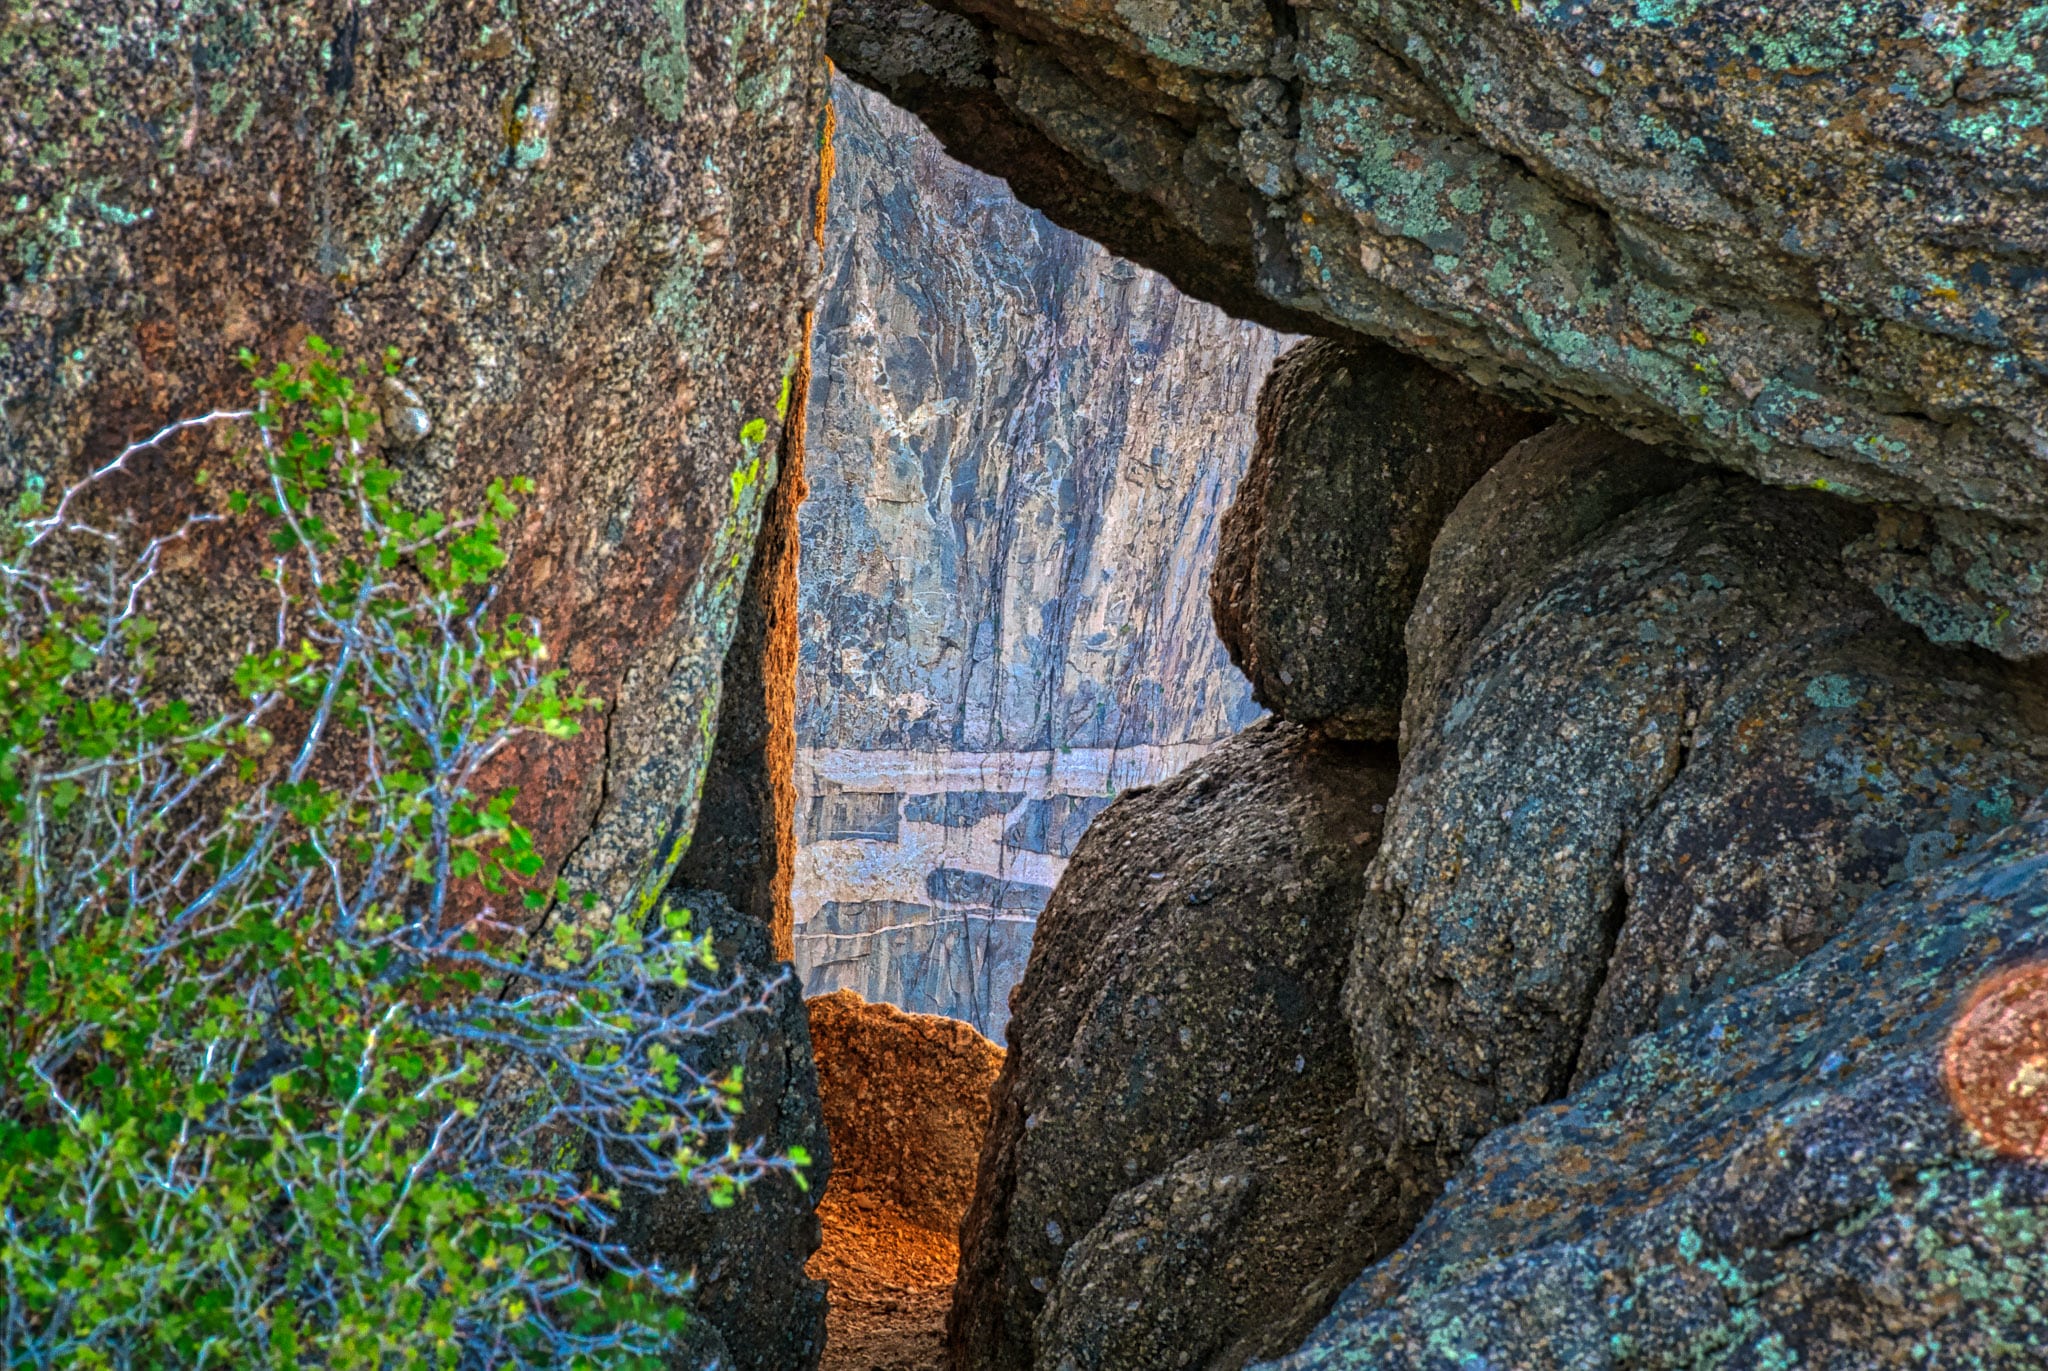 A view of the Painted Wall is nicely framed by boulders of ancient granite and schist. The scene is photographed from an overlook near the South Rim visitor's center in Black Canyon of the Gunnison National Park near Montrose, Colorado.